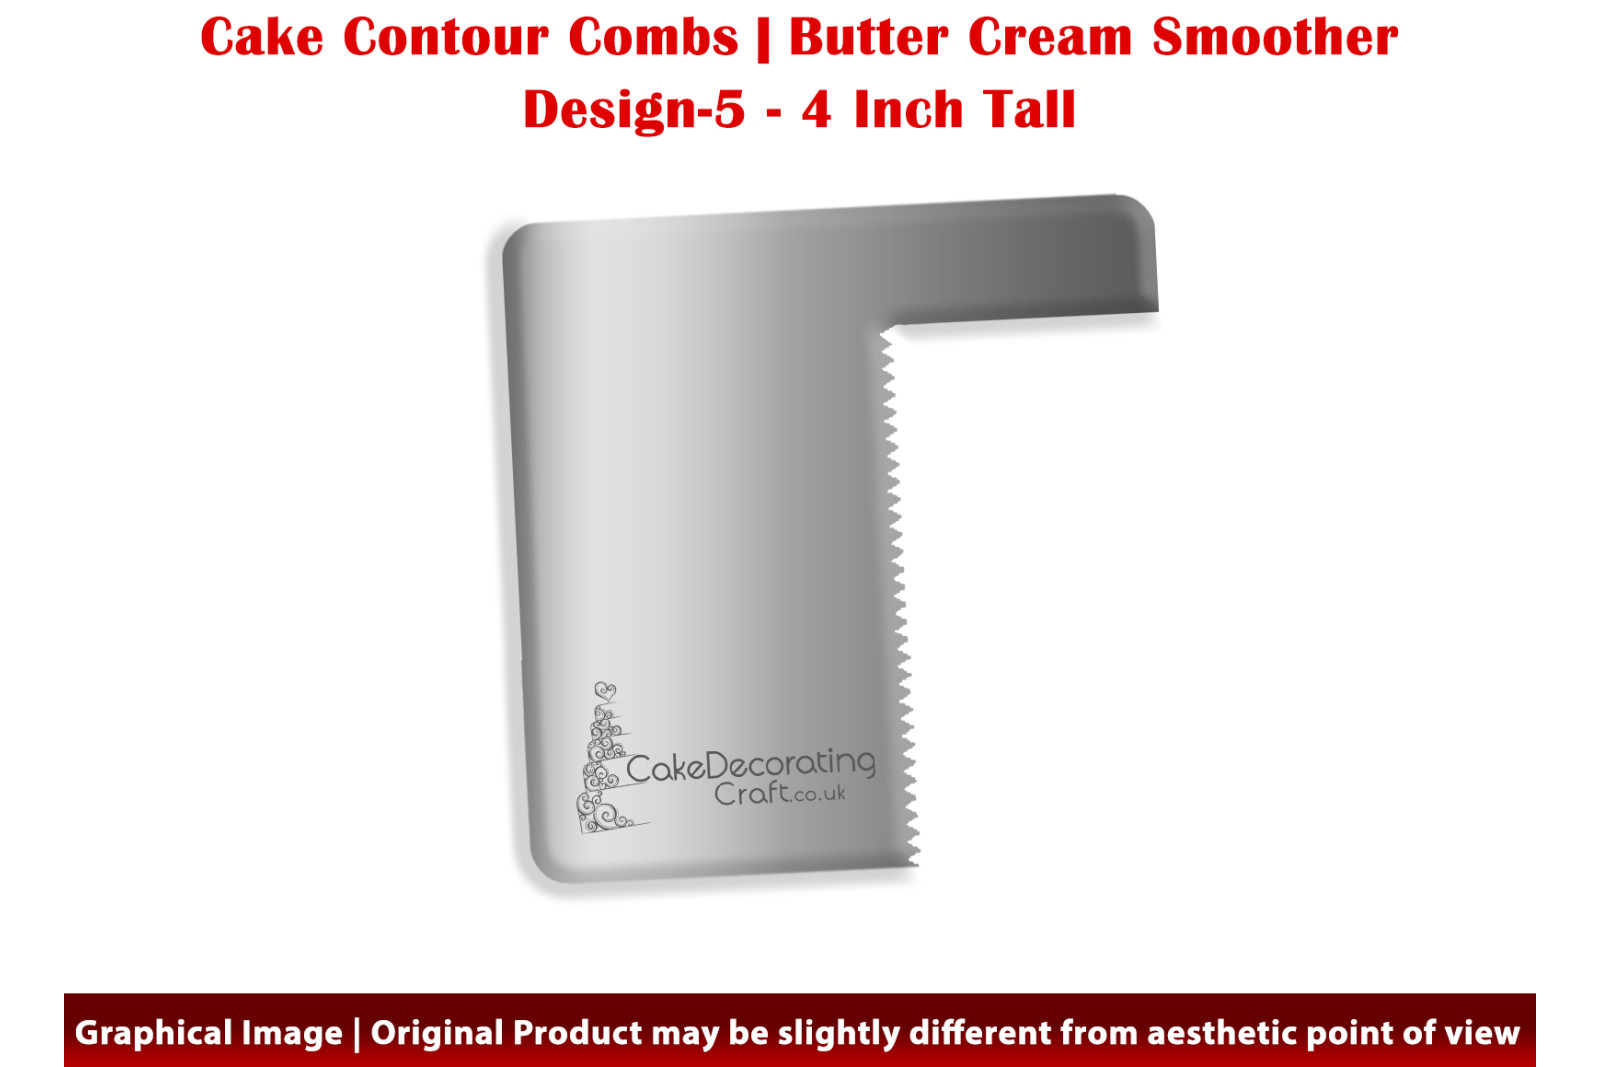 Zig Zag | 4 Inch | Cake Decorating Craft | Cake Contour Combs | Smoothing | Metal Spreader | Butter Cream Smoothing | Genius Tool